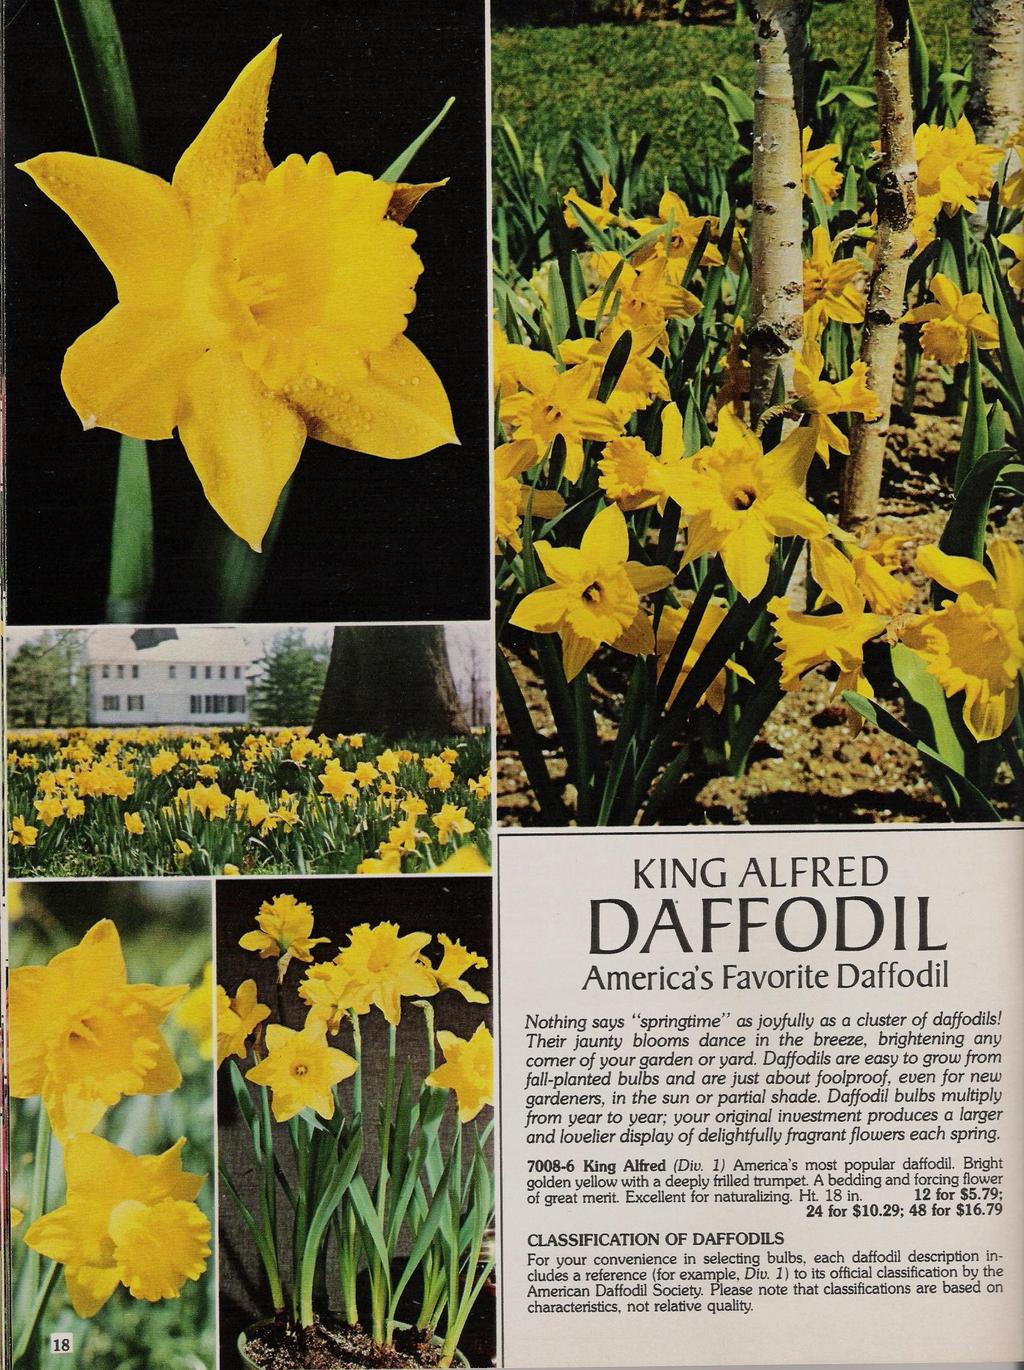 KING ALFRED DAFFODIL Americas Favorite Daffodil Nothing says "springtime" as joyfully as a cluster of daffodils! Their jaunty blooms dance in the breeze, brightening any corner of your garden or yard.